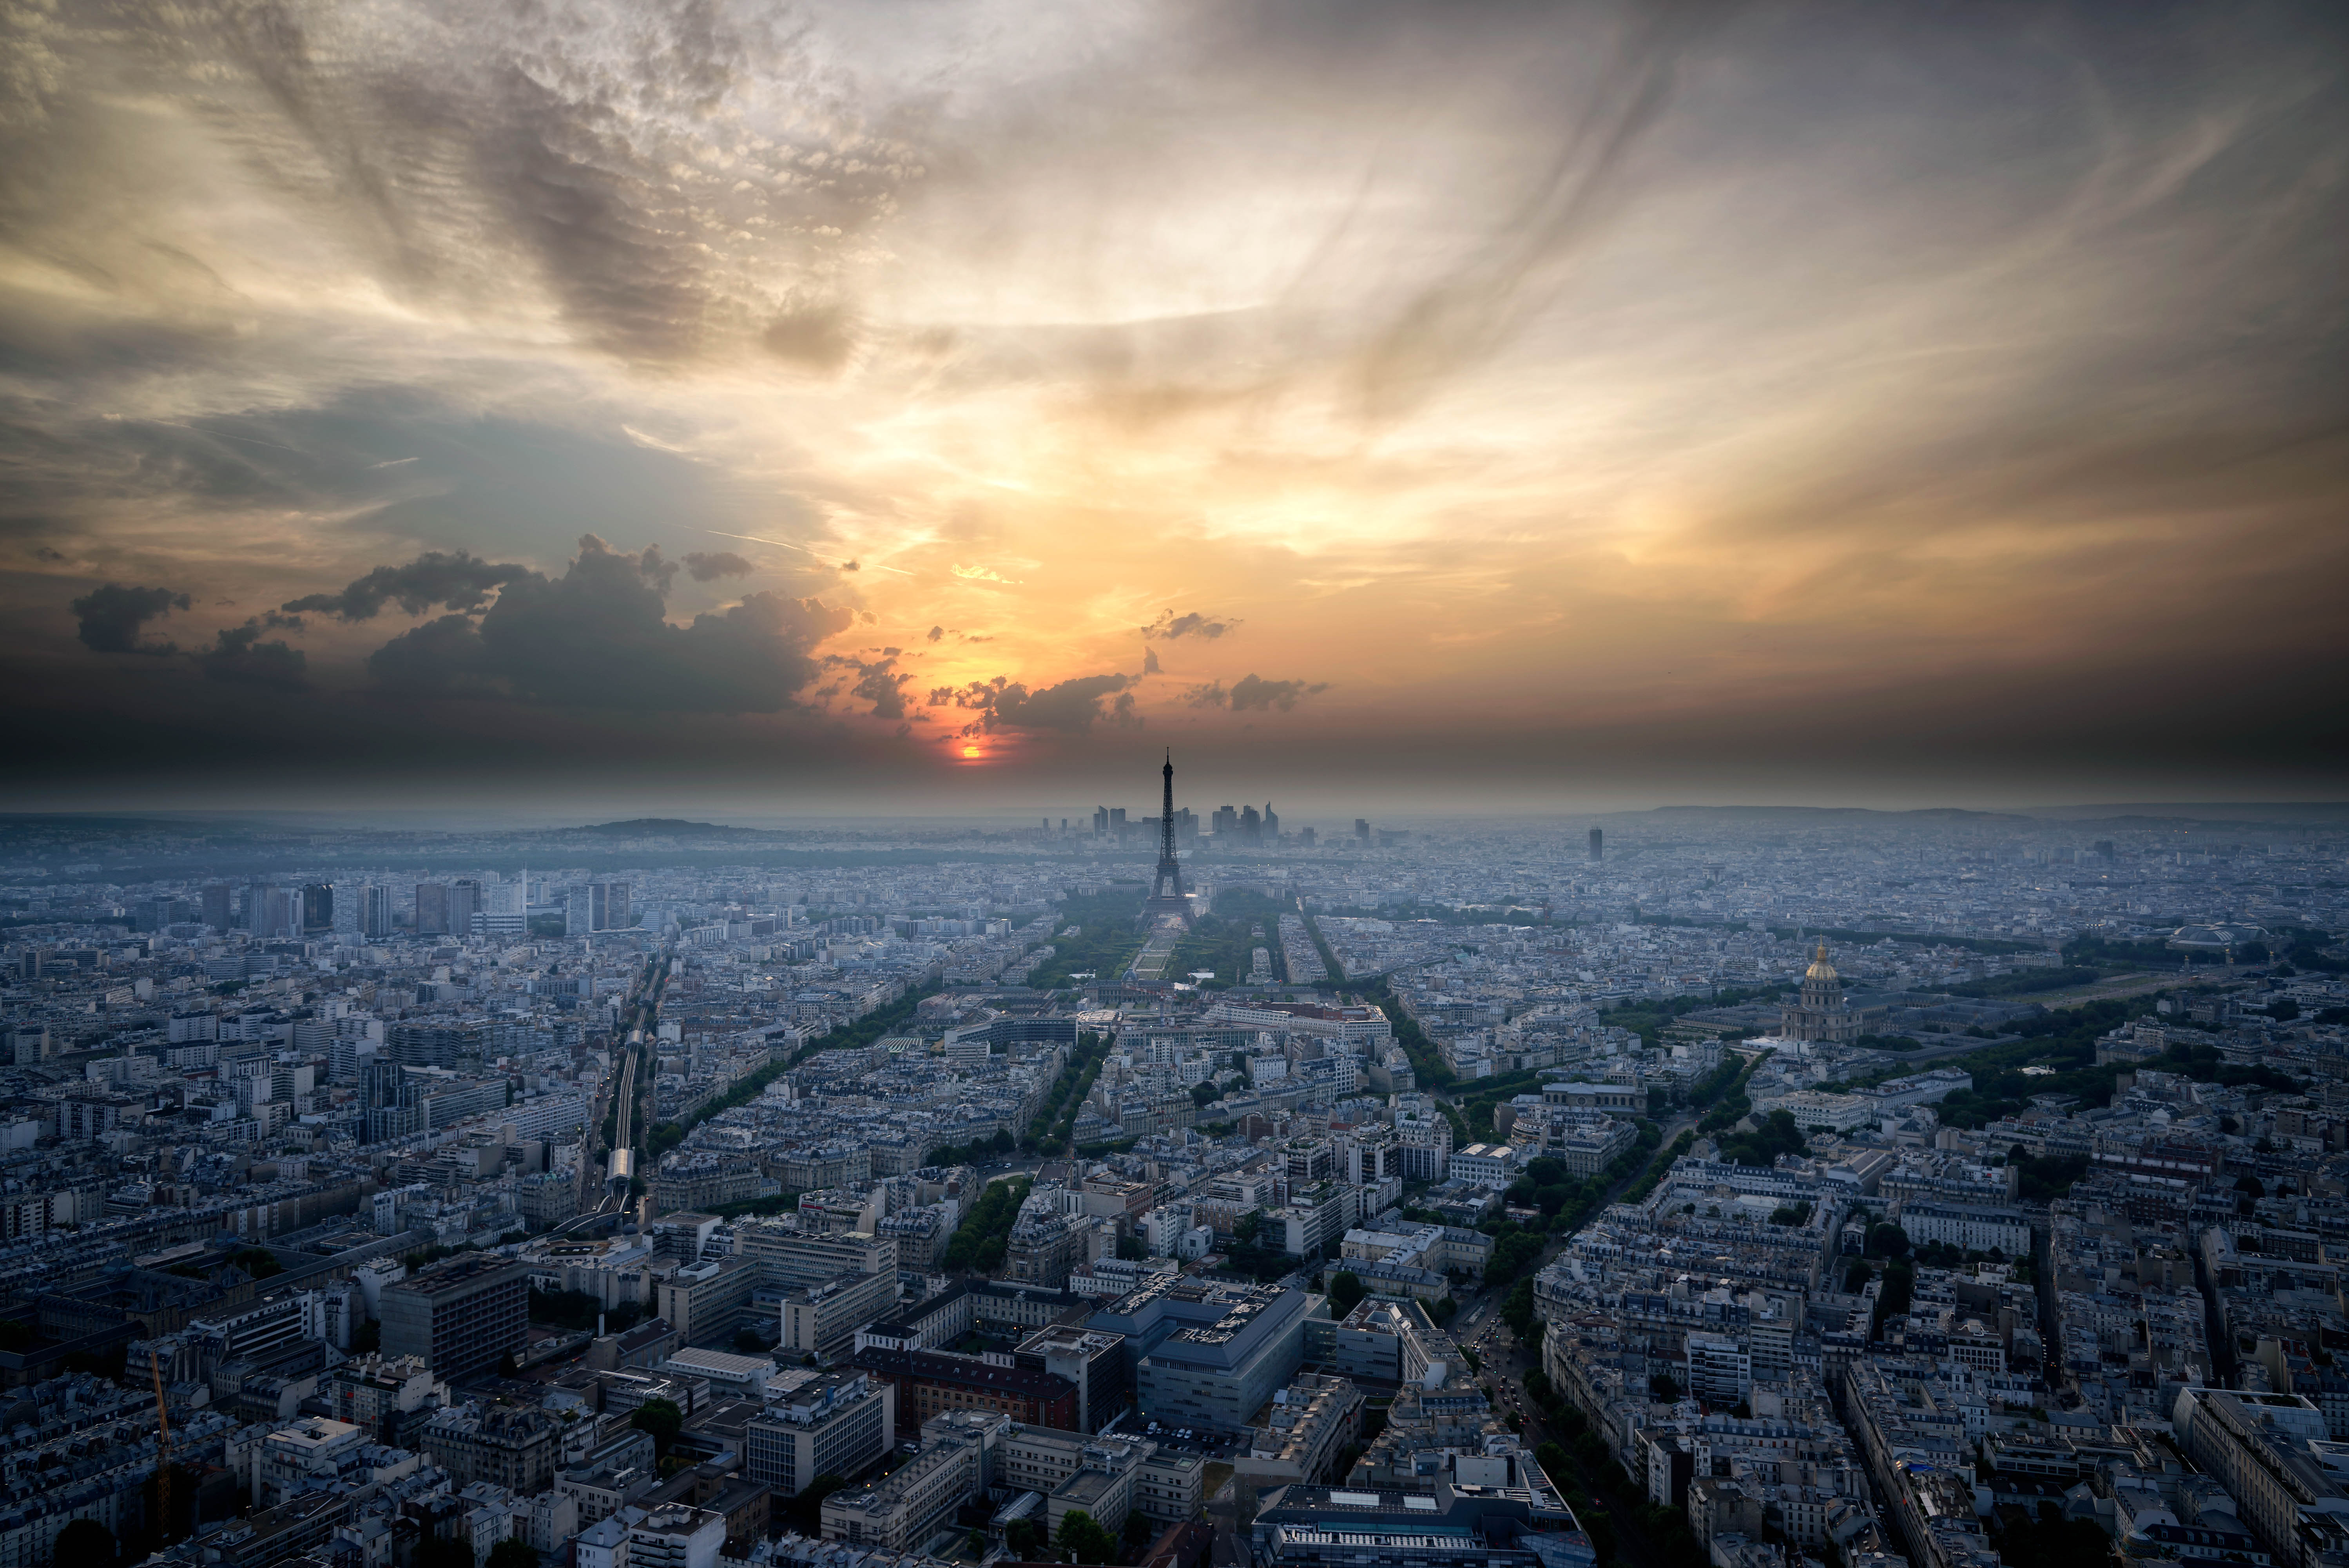 paris, cities, sunset, sky, architecture, view from above, france